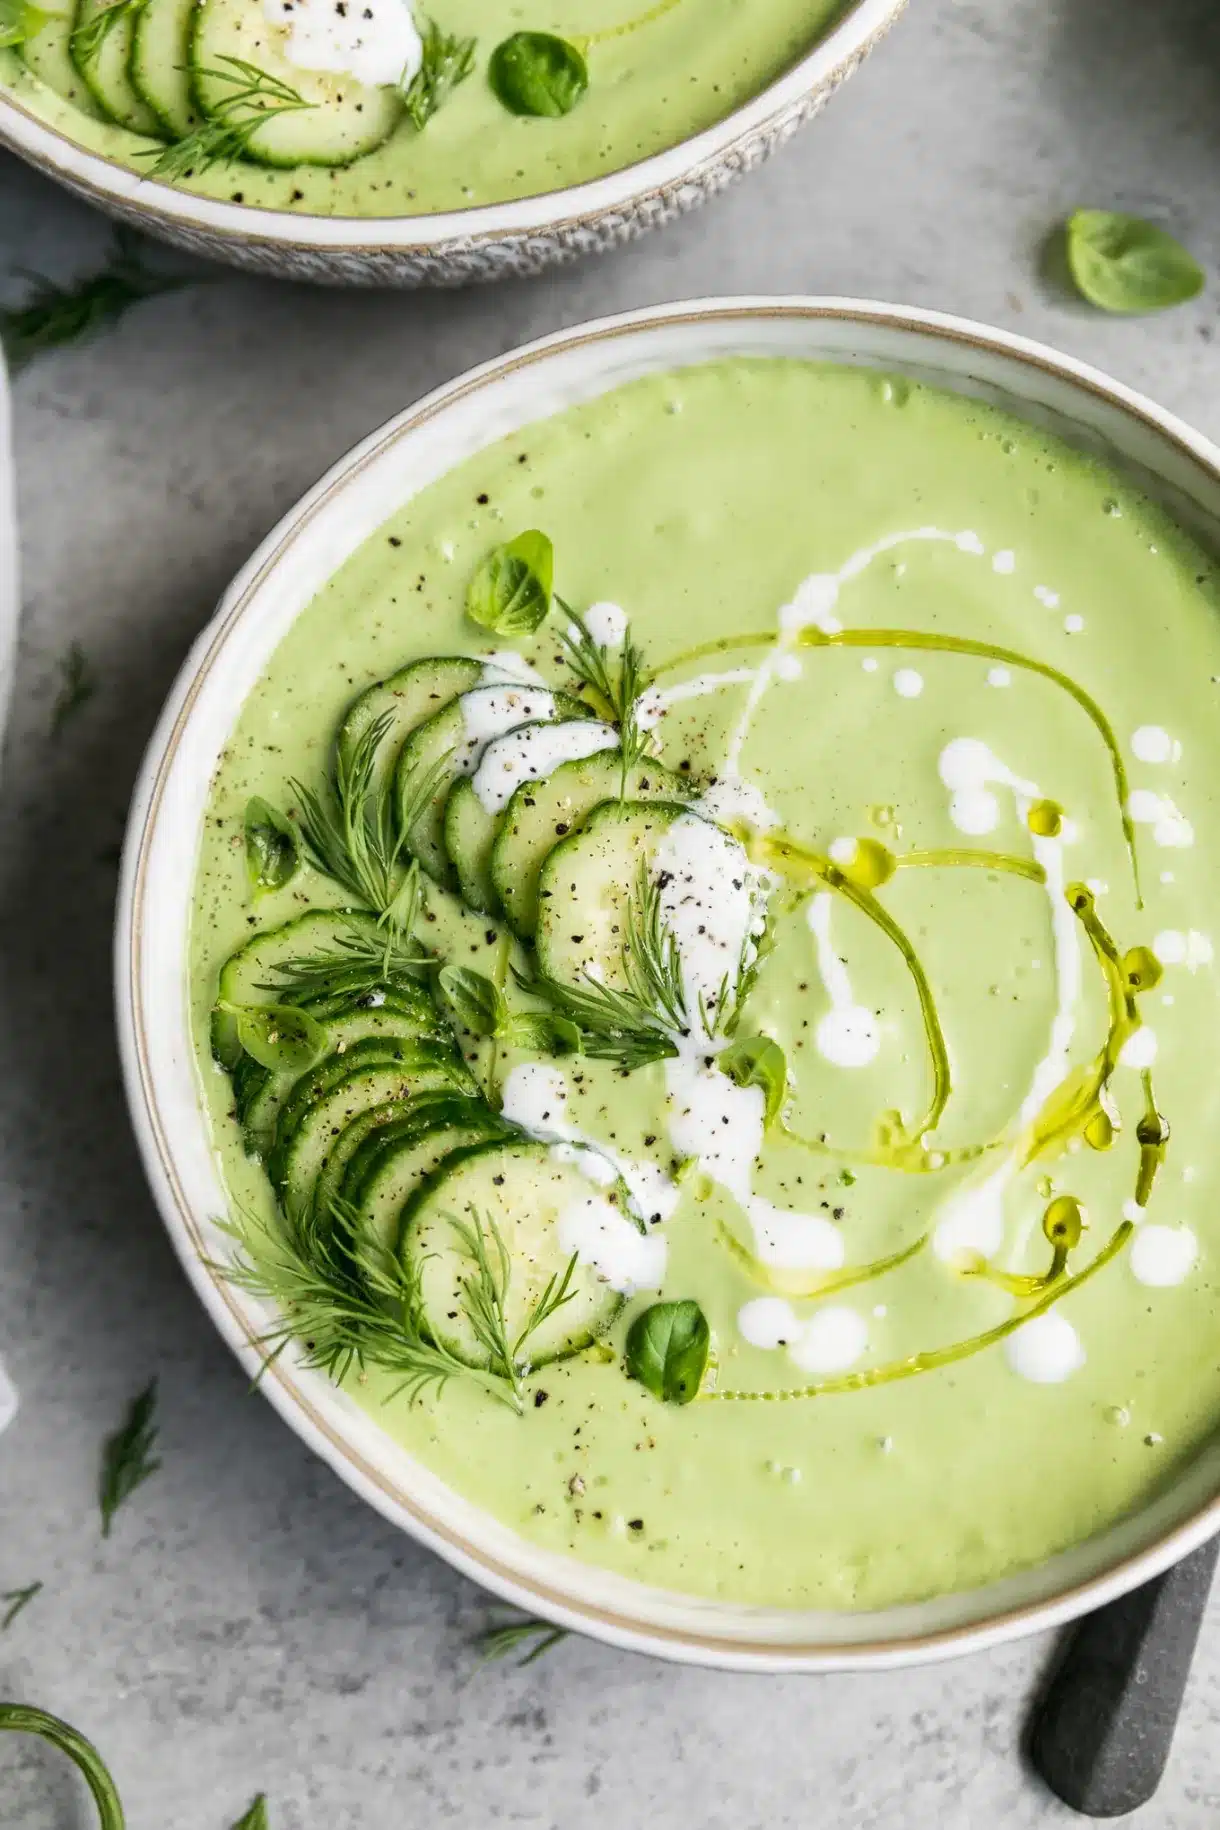 Large bowl of light green creamy soup with olive oil drizzle and fresh cucumbers on top.